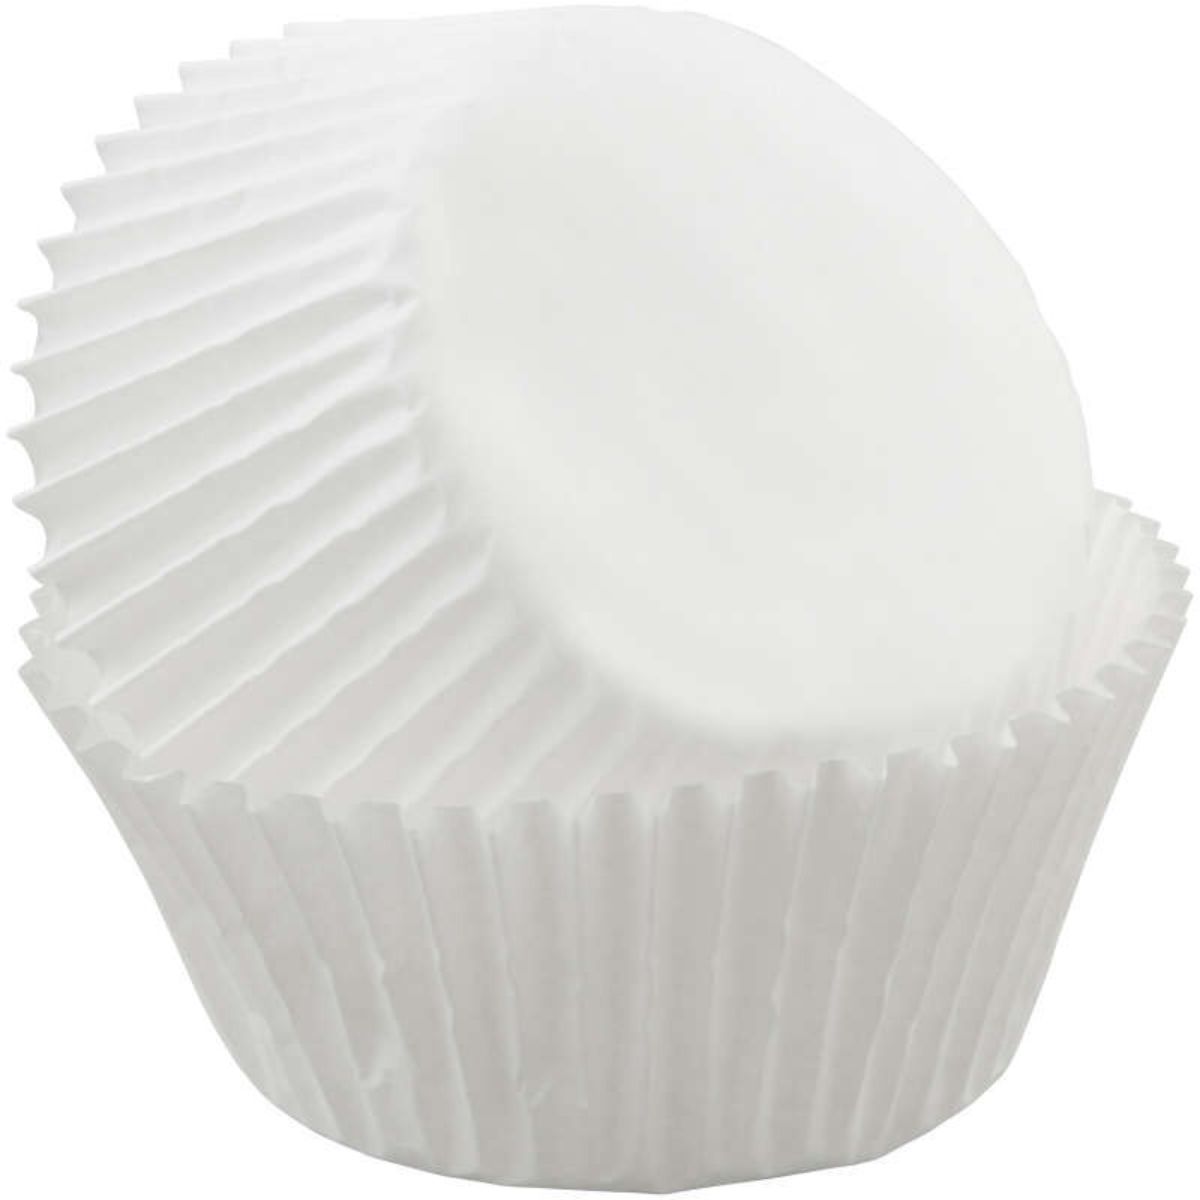 https://cdn.shopify.com/s/files/1/0146/9746/3908/products/415-2505-Wilton-White-Cupcake-Liners-75-Count-A2_1.jpg?v=1609346538